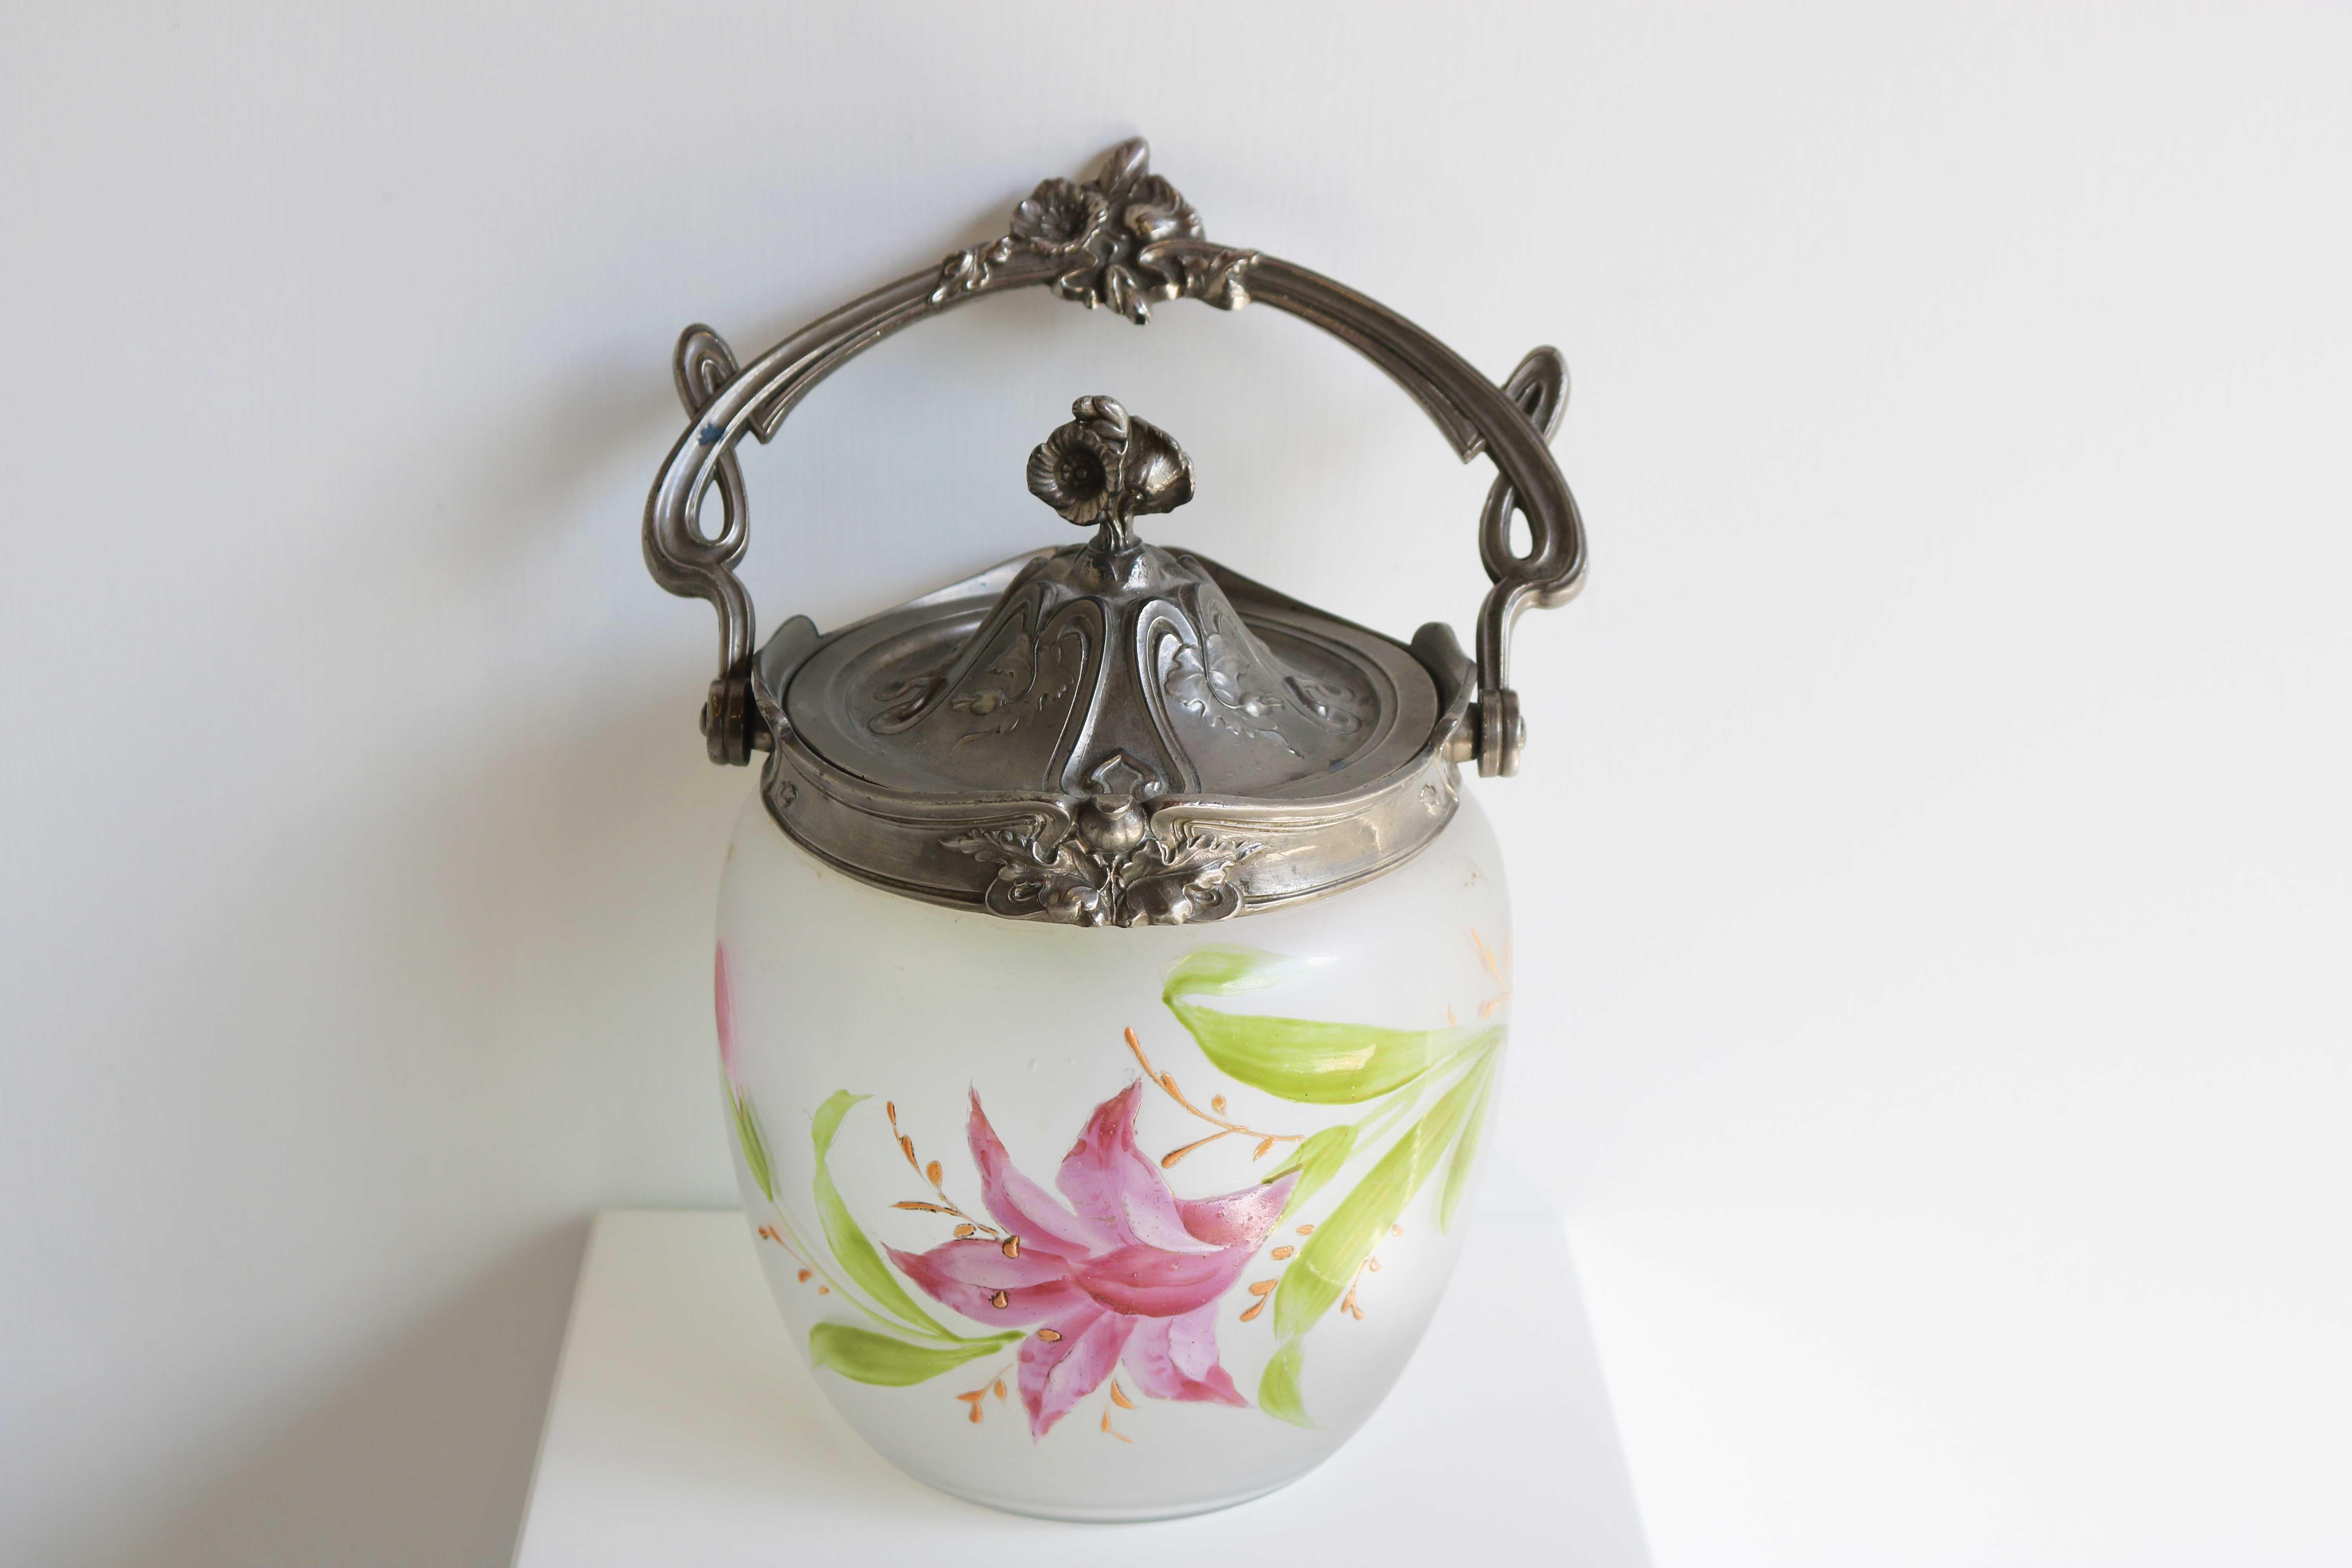 Antique floral glass biscuit barrel / cookie jar with Art Nouveau Enamel Decoration, France 1890-1919

An antique biscuit jar of frosted, satin glass with a silvered metal rim, removable top, and bail handle dating to the late 19th-early 20th